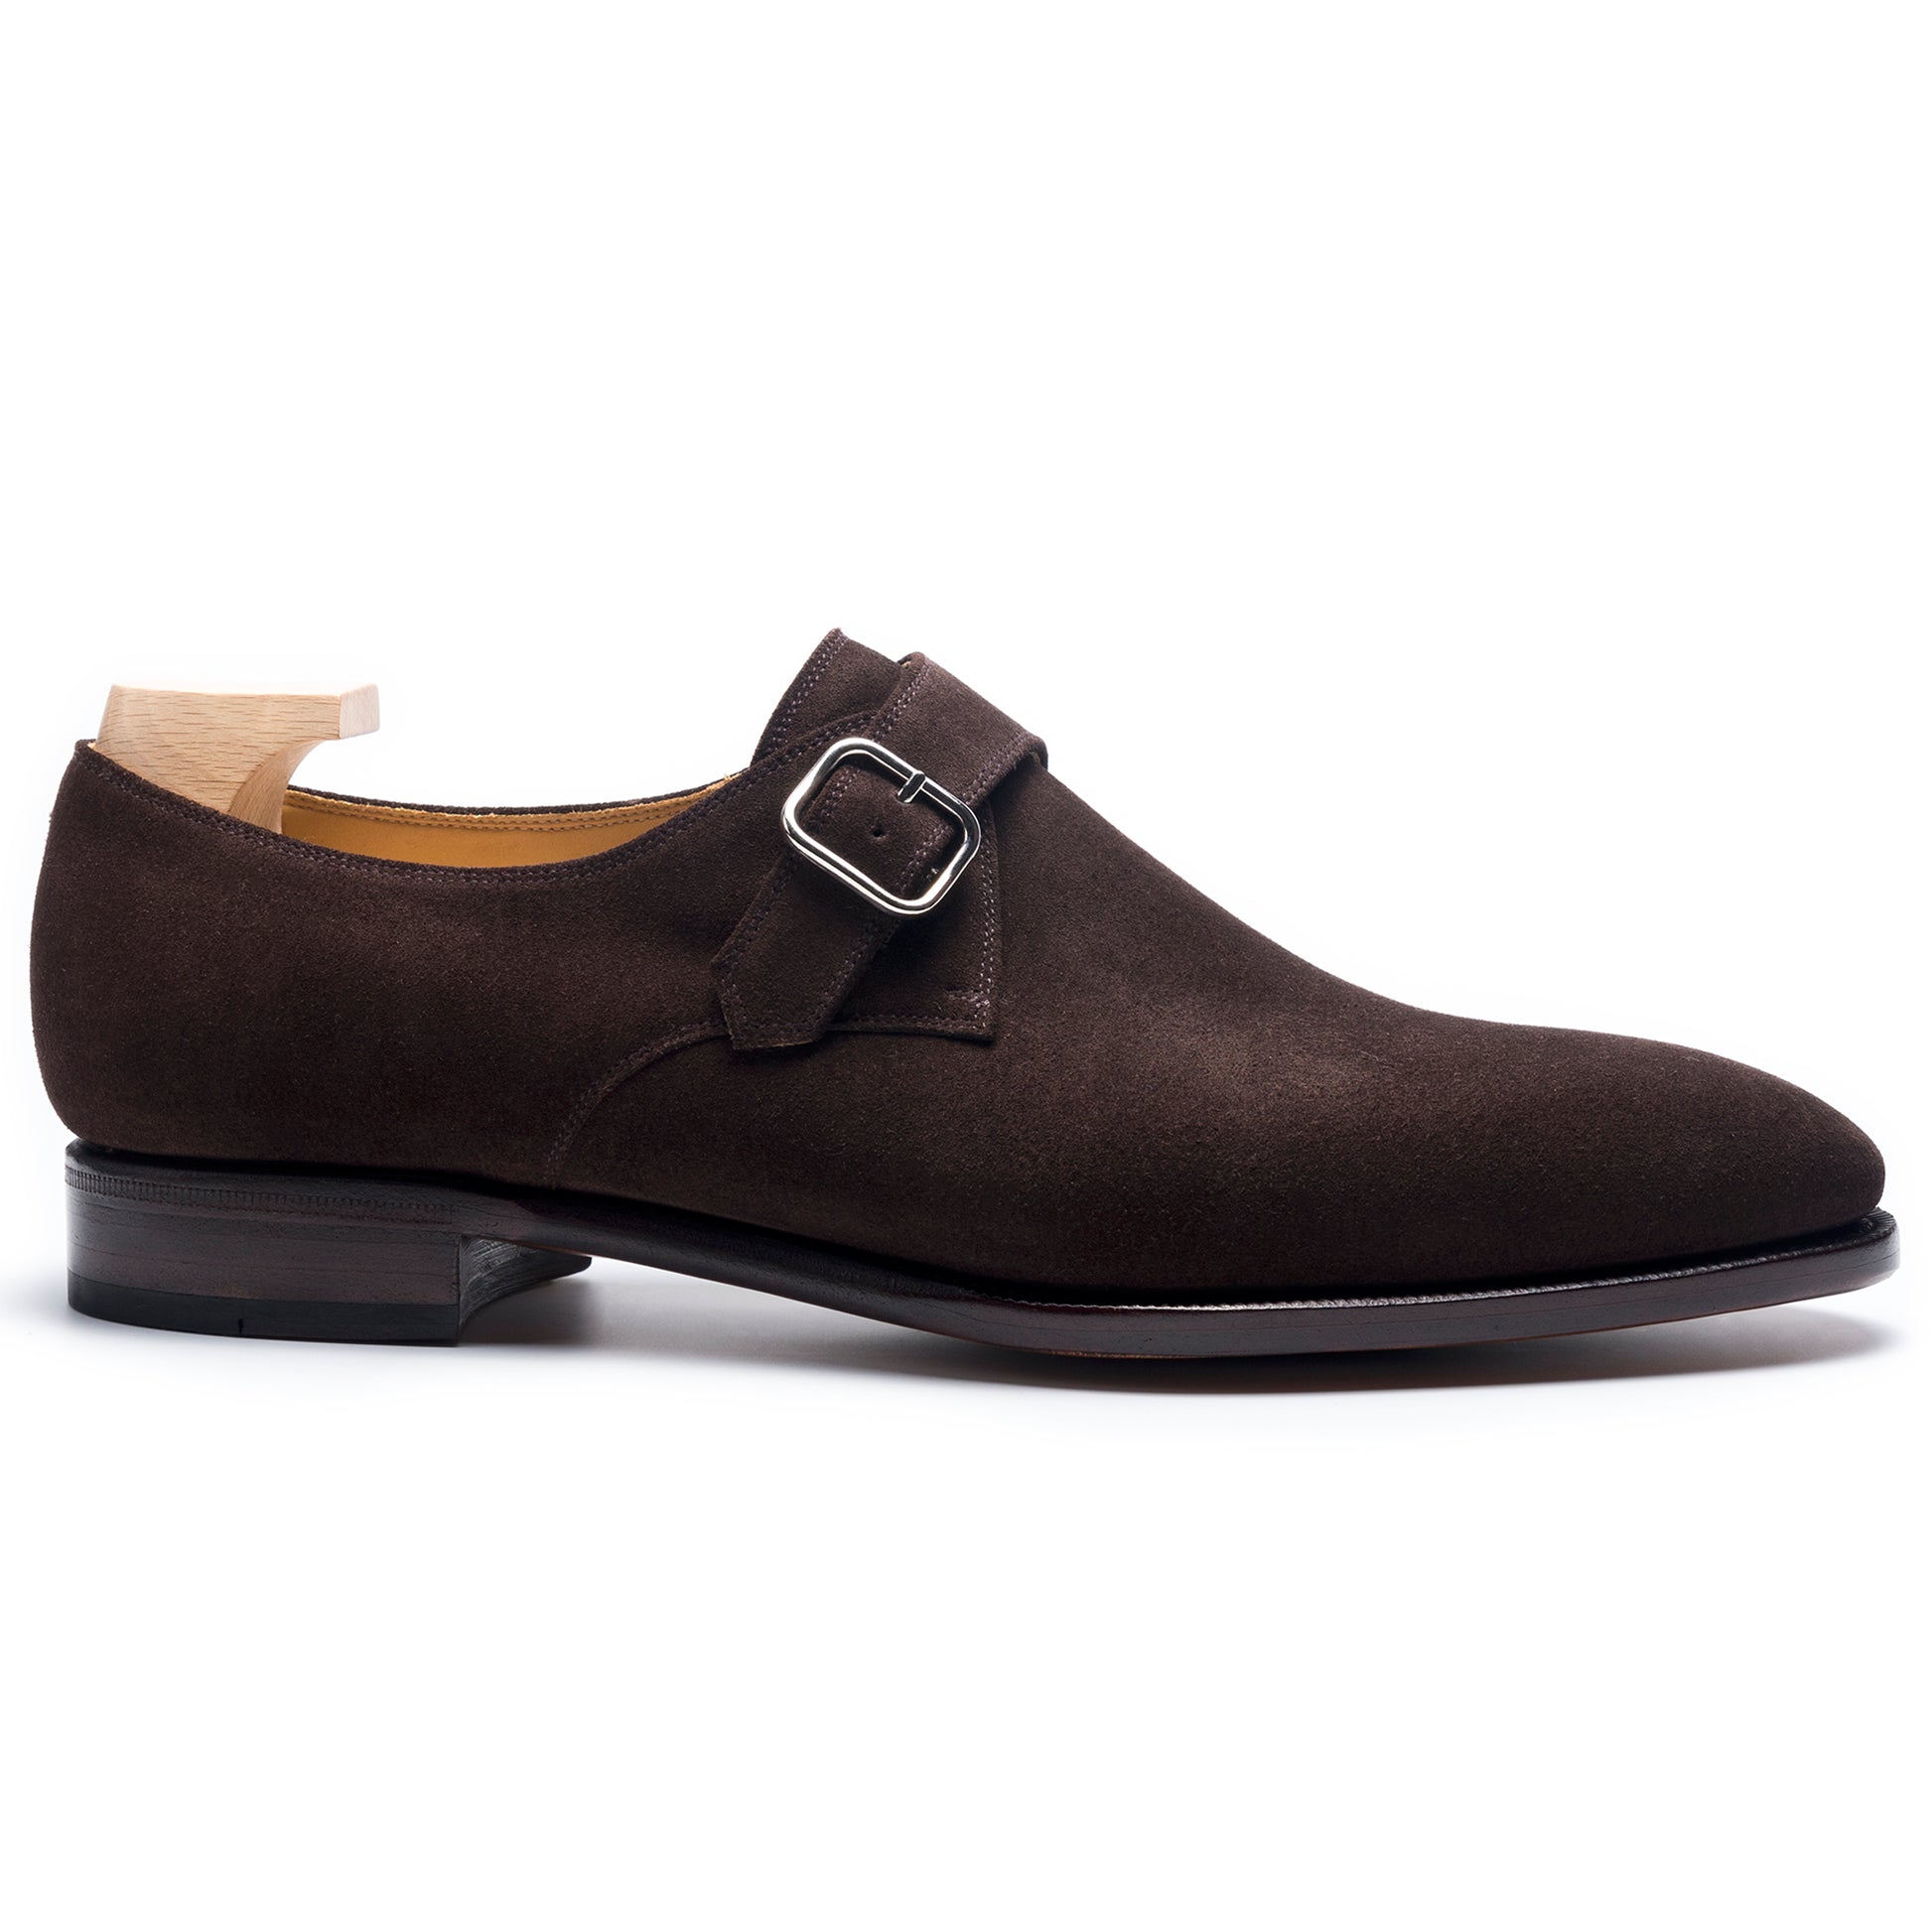 TLB Mallorca leather shoes 196 / GOYA / SUEDE BROWN / SILVER